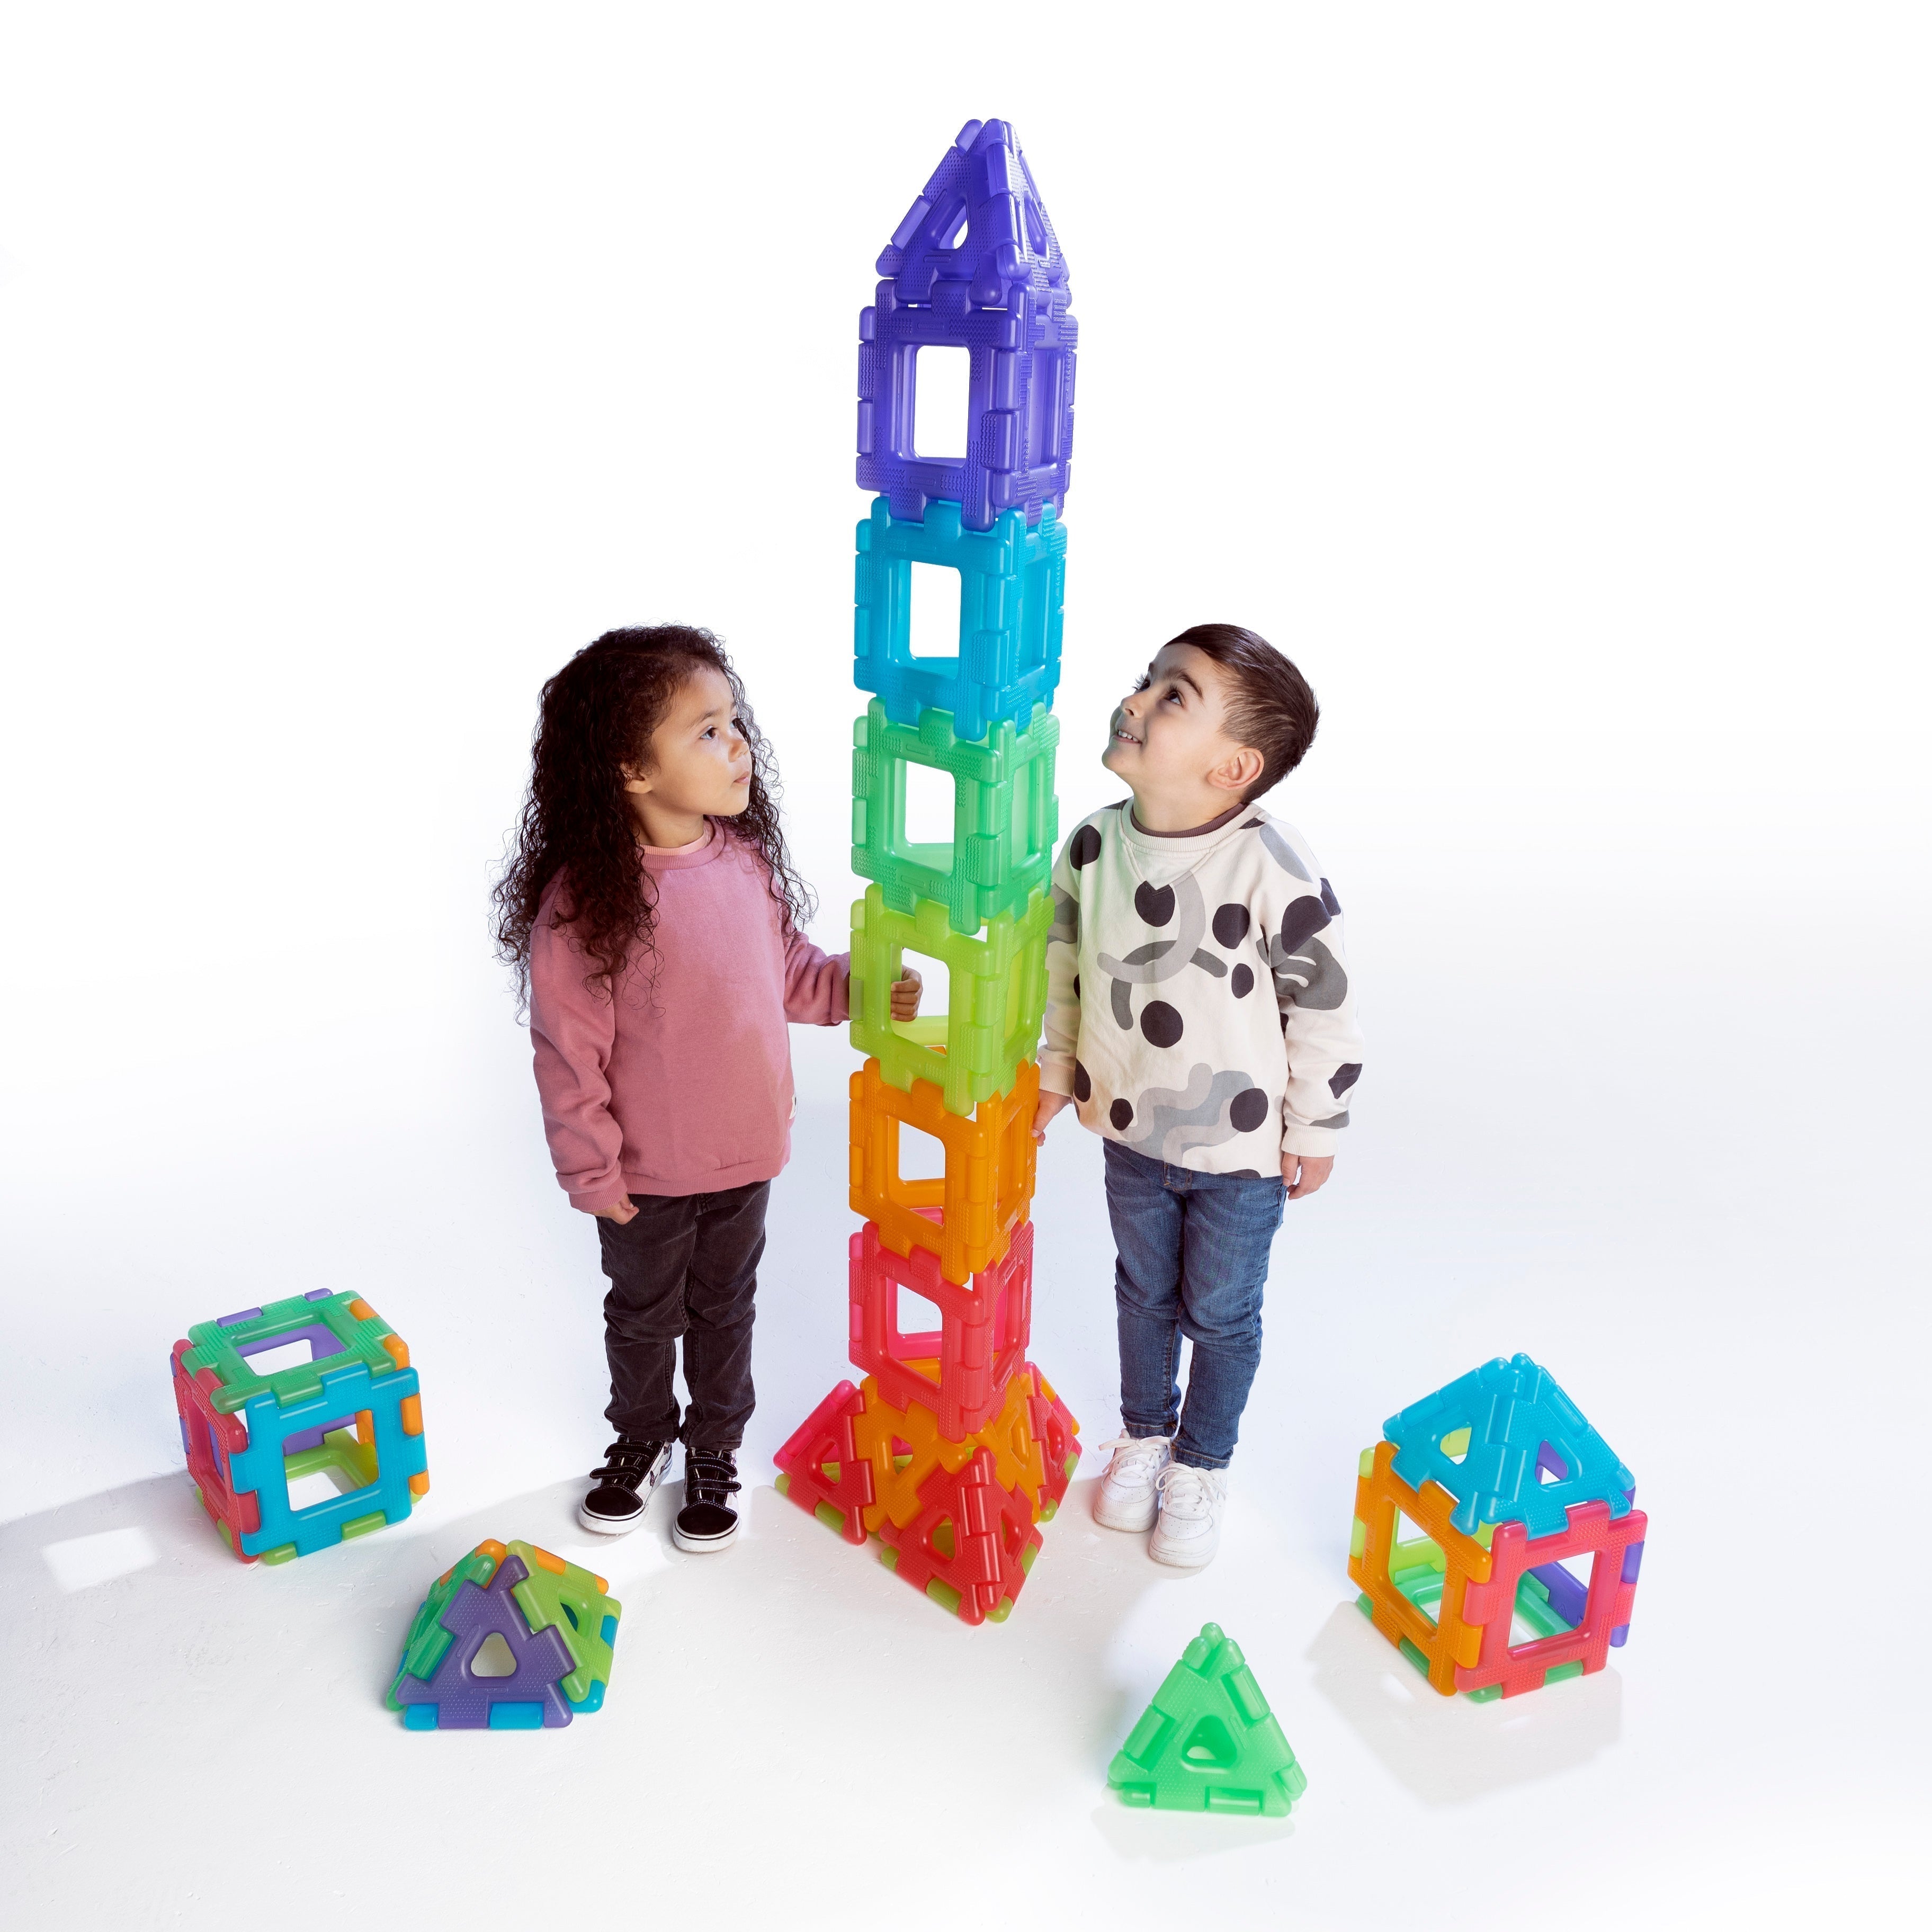 Translucent Giant Polydron Set-60 Pieces, Create colourful constructions with Translucent Giant Polydron! This 60-piece set contains equal numbers of squares and triangles in 6 stunning colours. The Translucent colours add a whole new dimension to play when using the pieces outdoors in natural sunlight or with a light source. Improve fine and gross motor skills through construction play. The Translucent Giant Polydron Set-60 Pieces set is suitable for both indoor and outdoor use. The large, chunky pieces ar